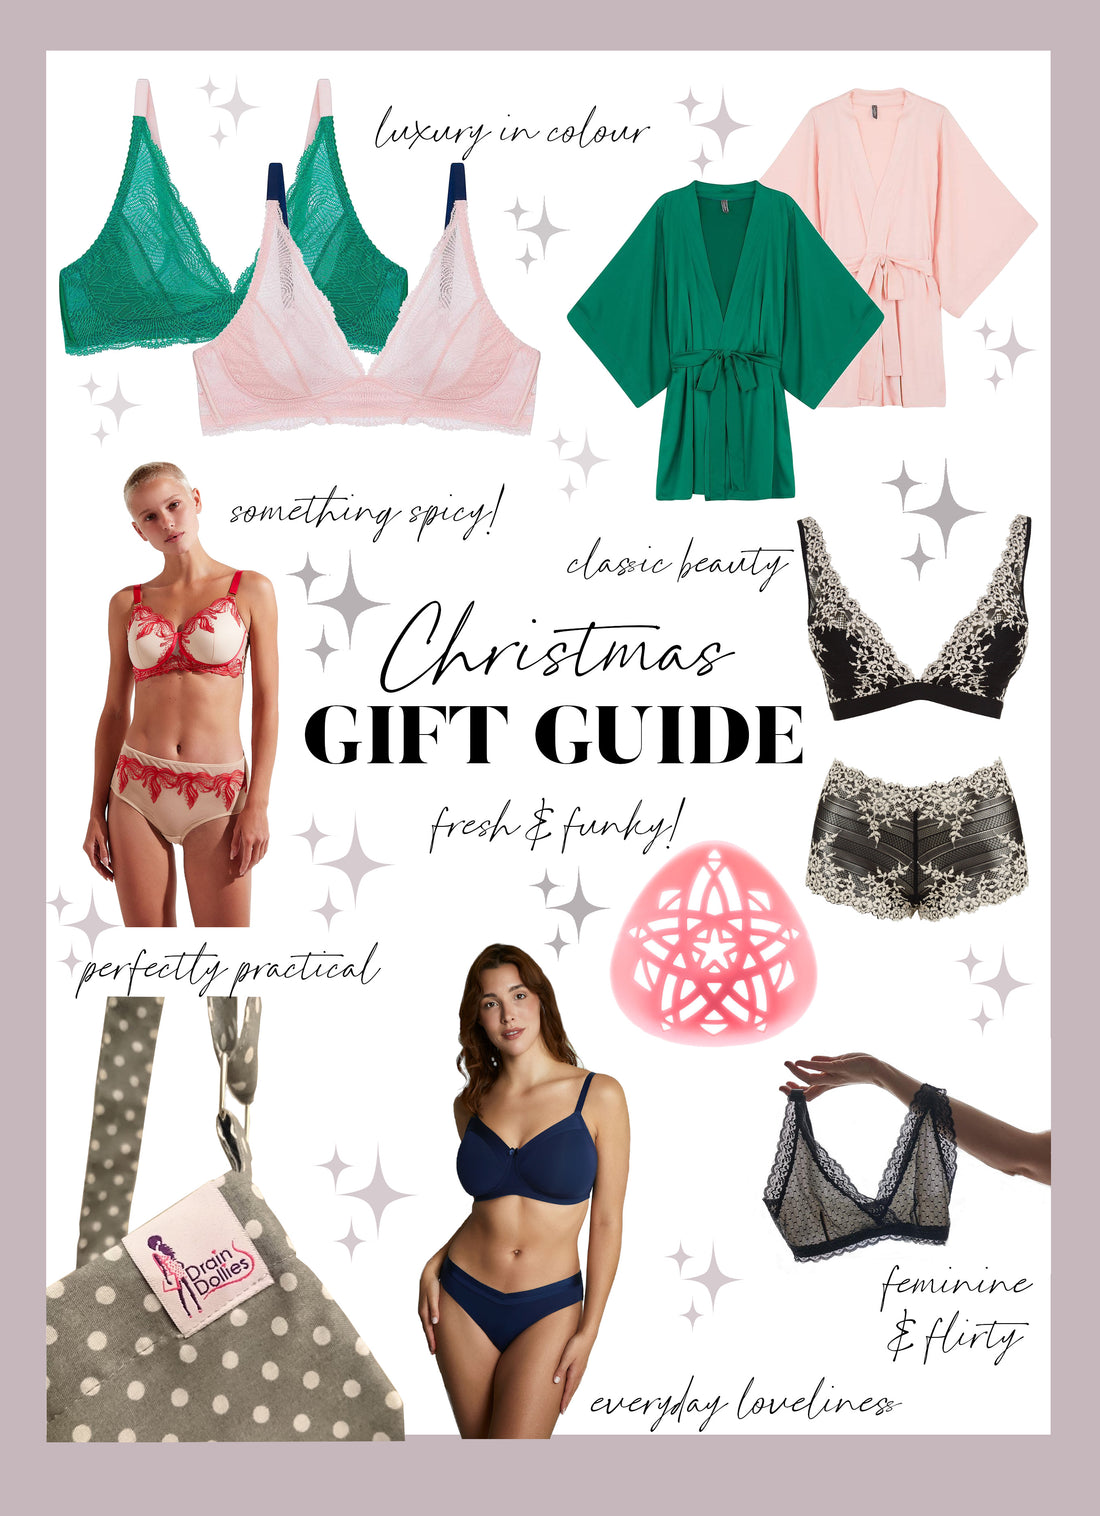 Our Christmas Gift Guide is here! x the Bra Sisters